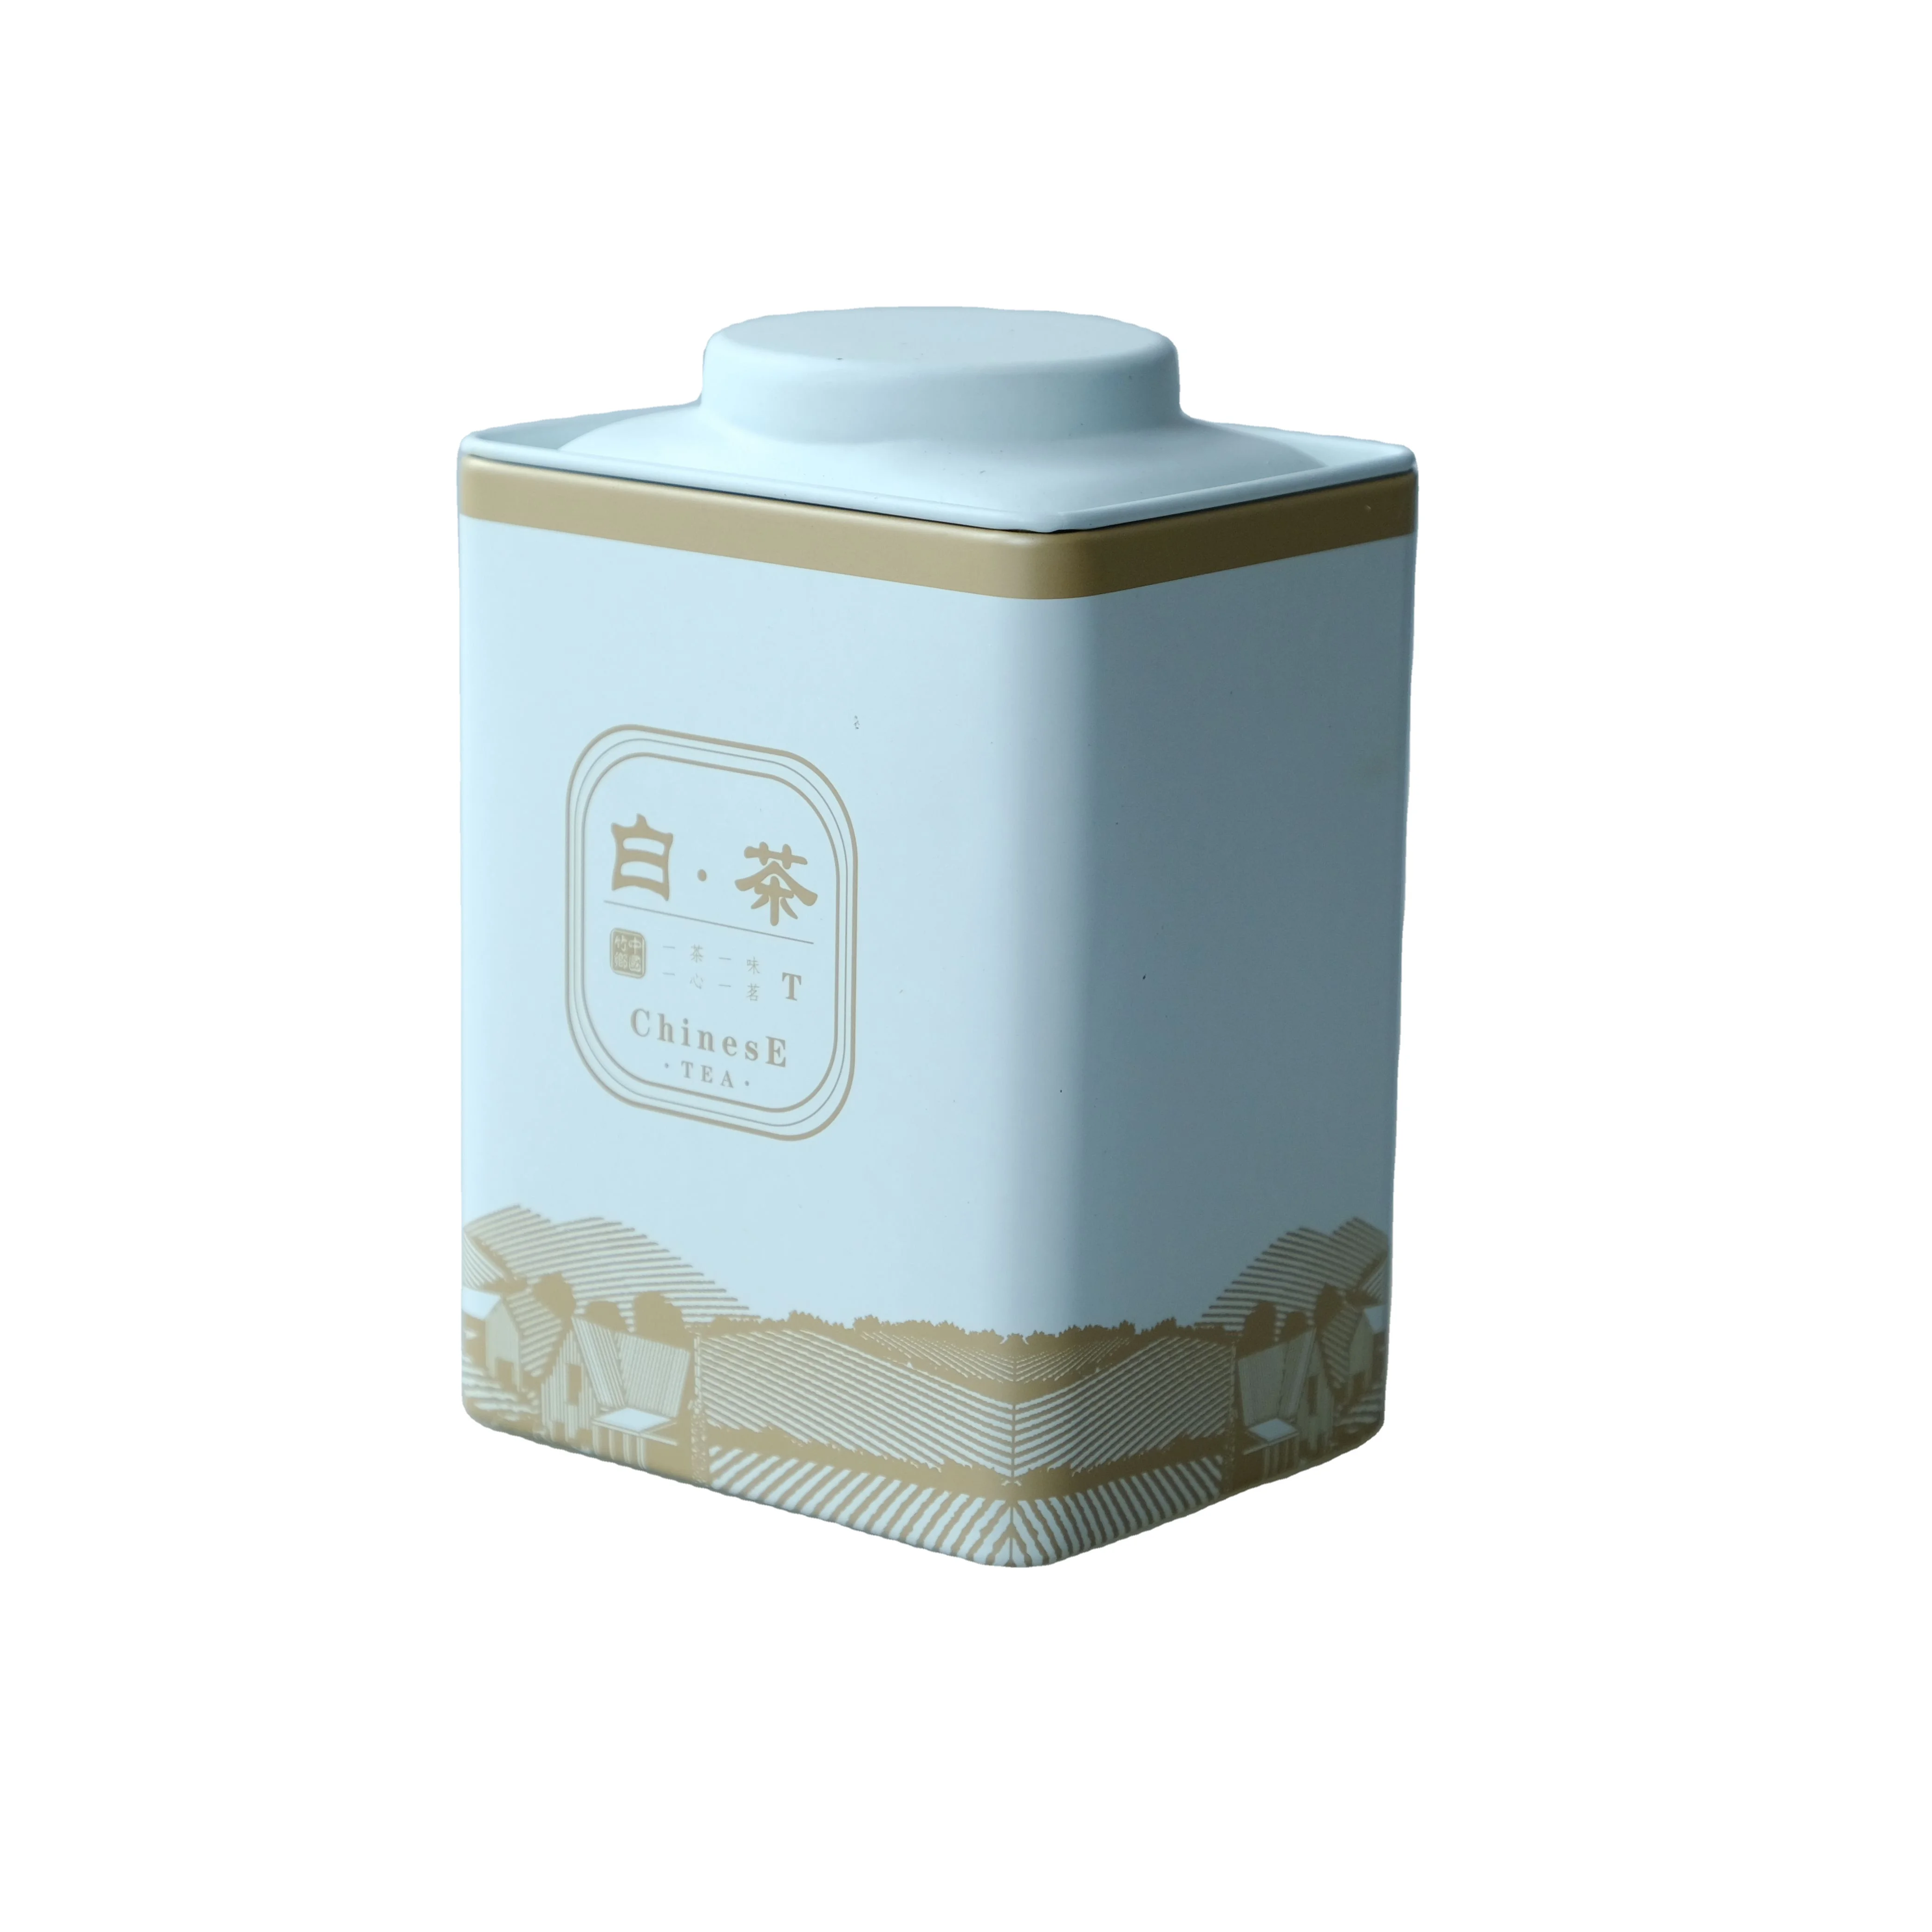 
Customized supply of metal containers, various types of beautifully designed tea boxes  (1600235111281)